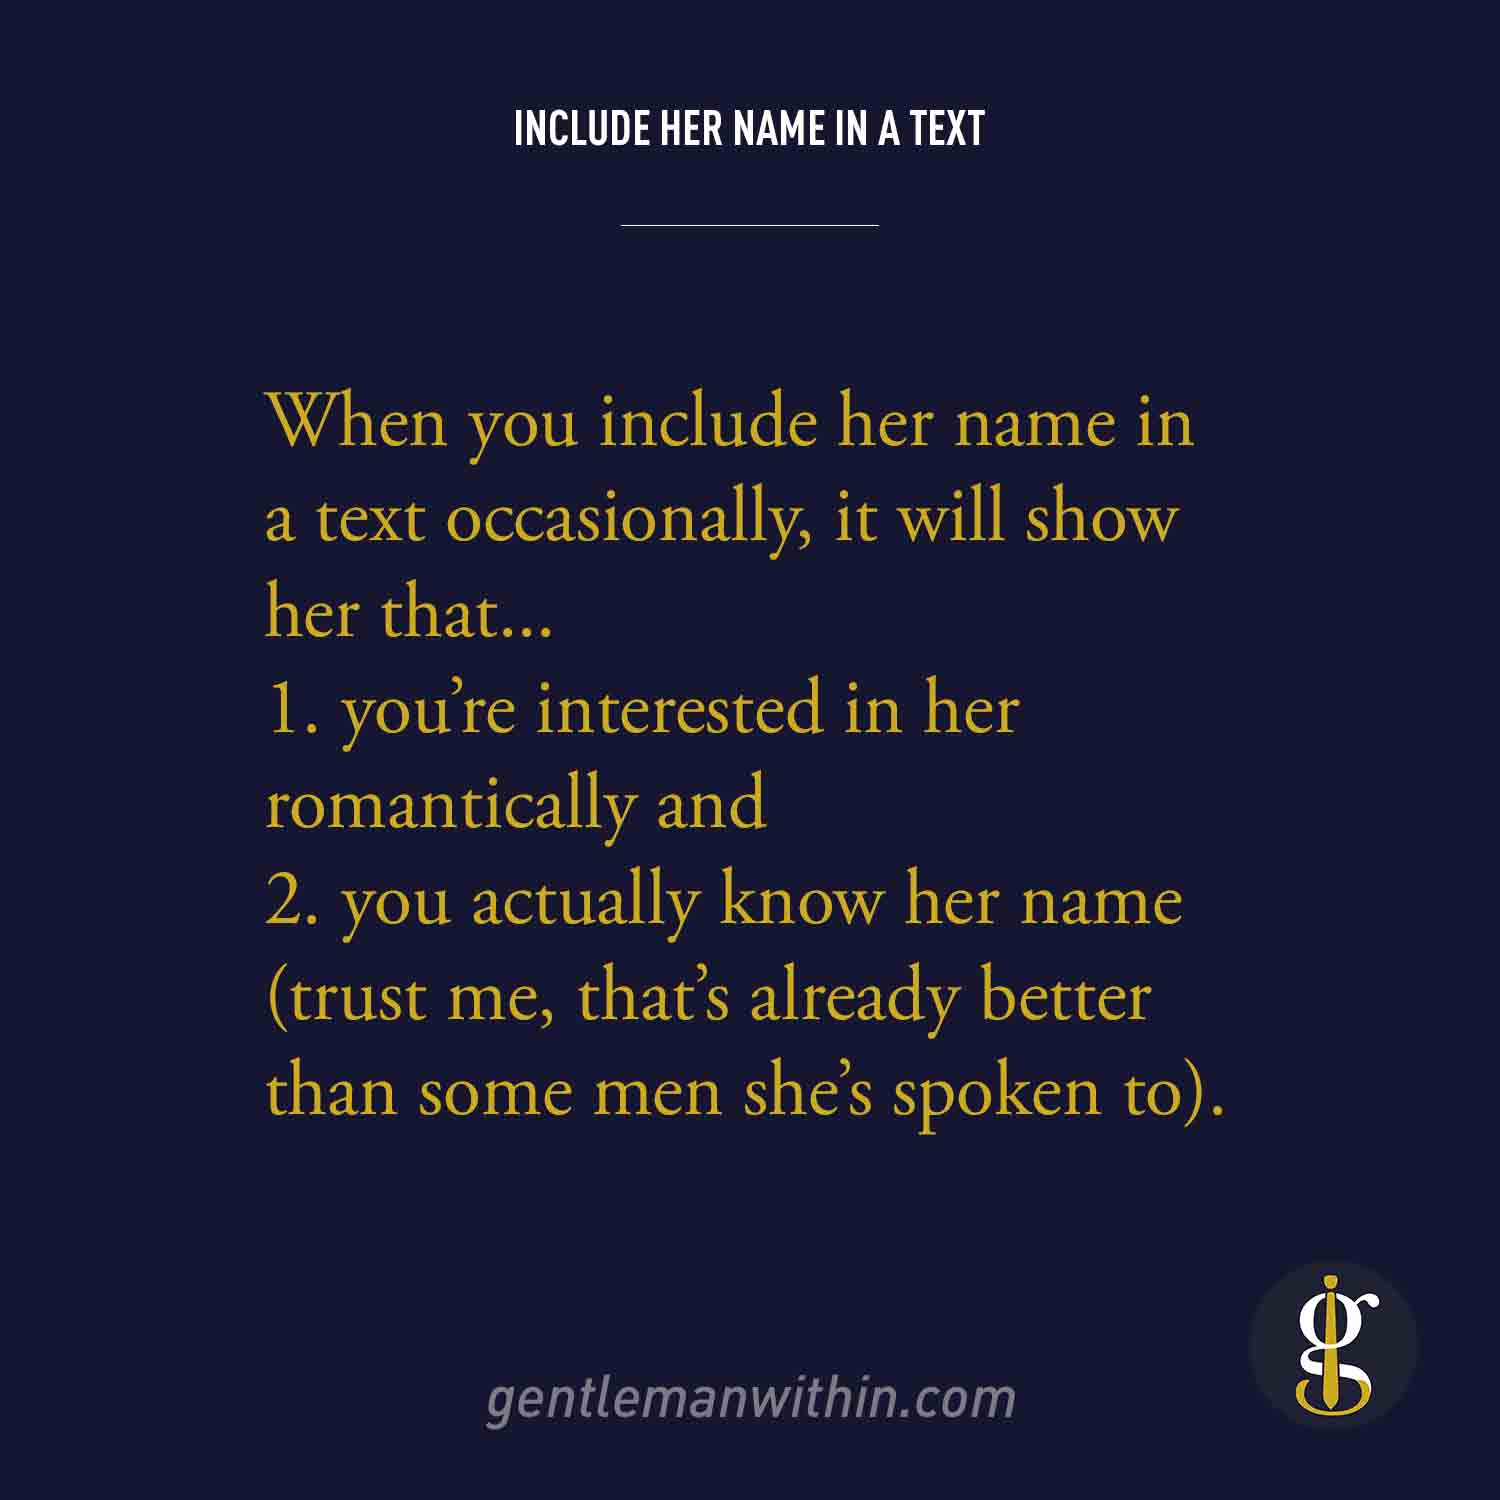 include her name in a text